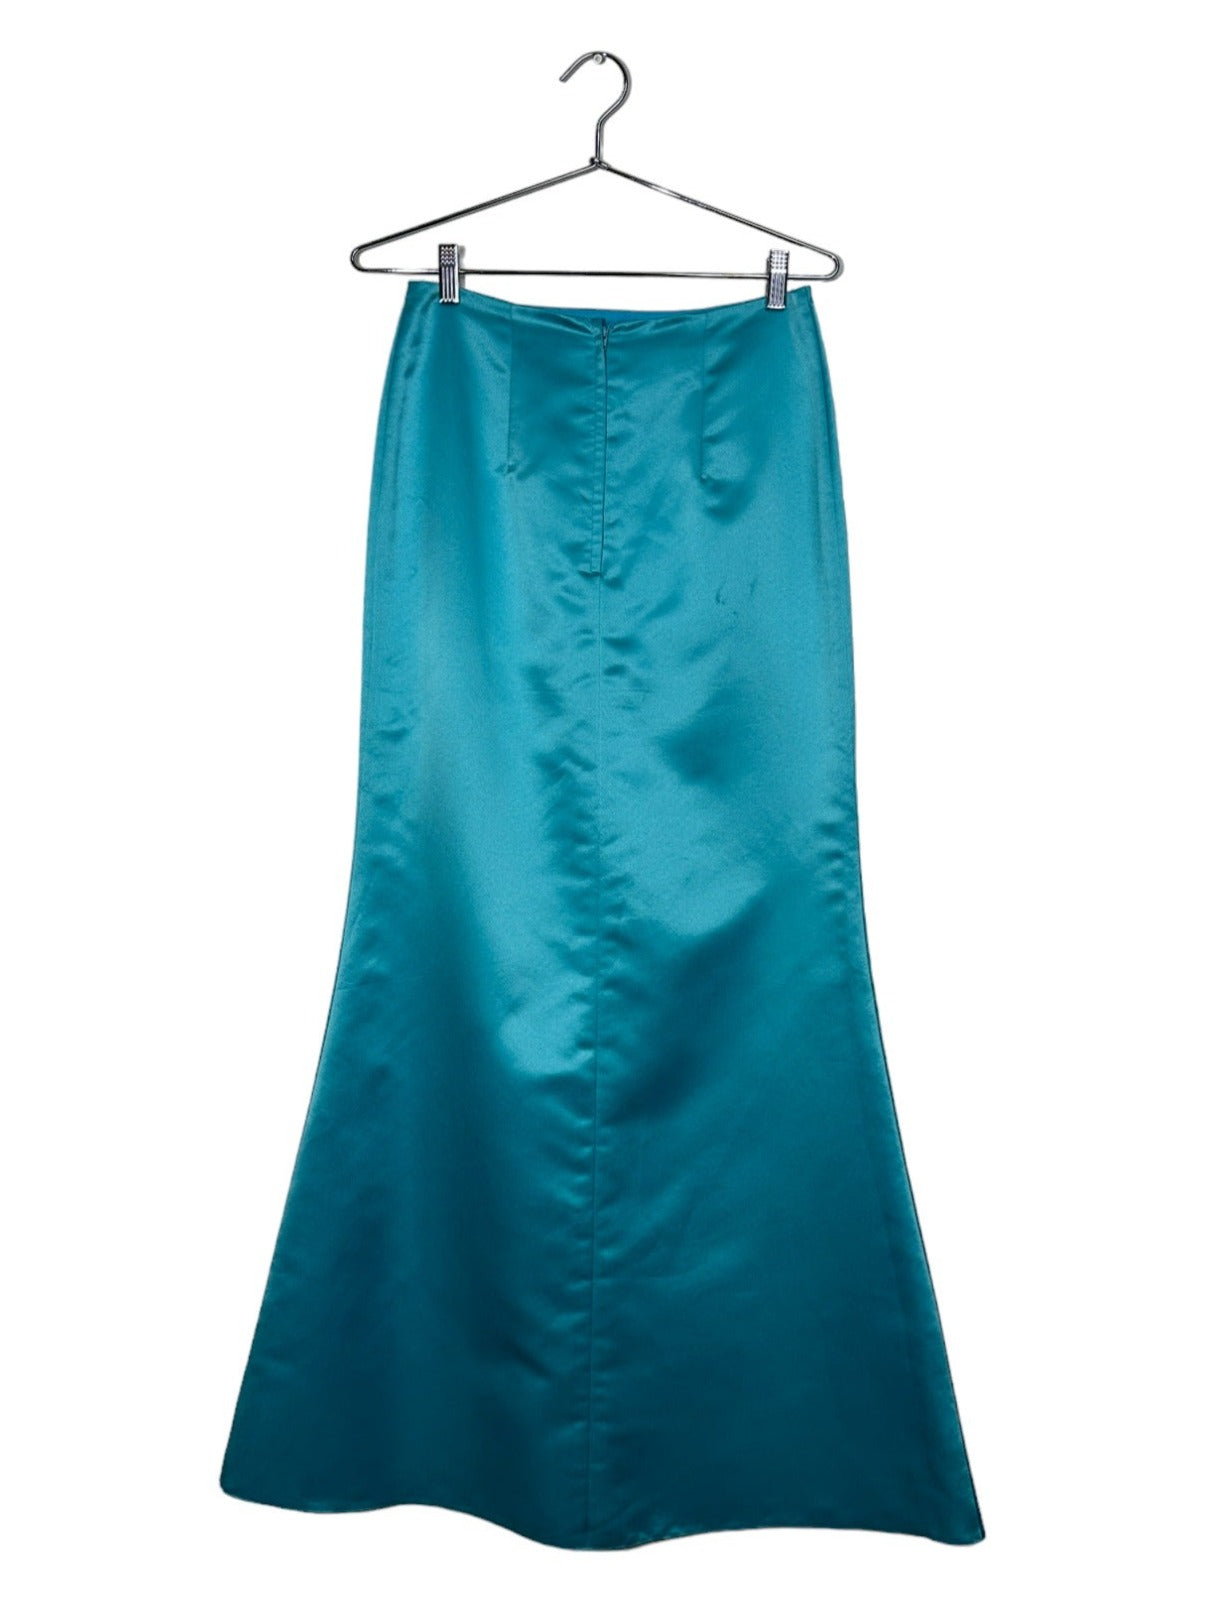 Teal Floral Beaded Strapless Top & Maxi Skirt Set